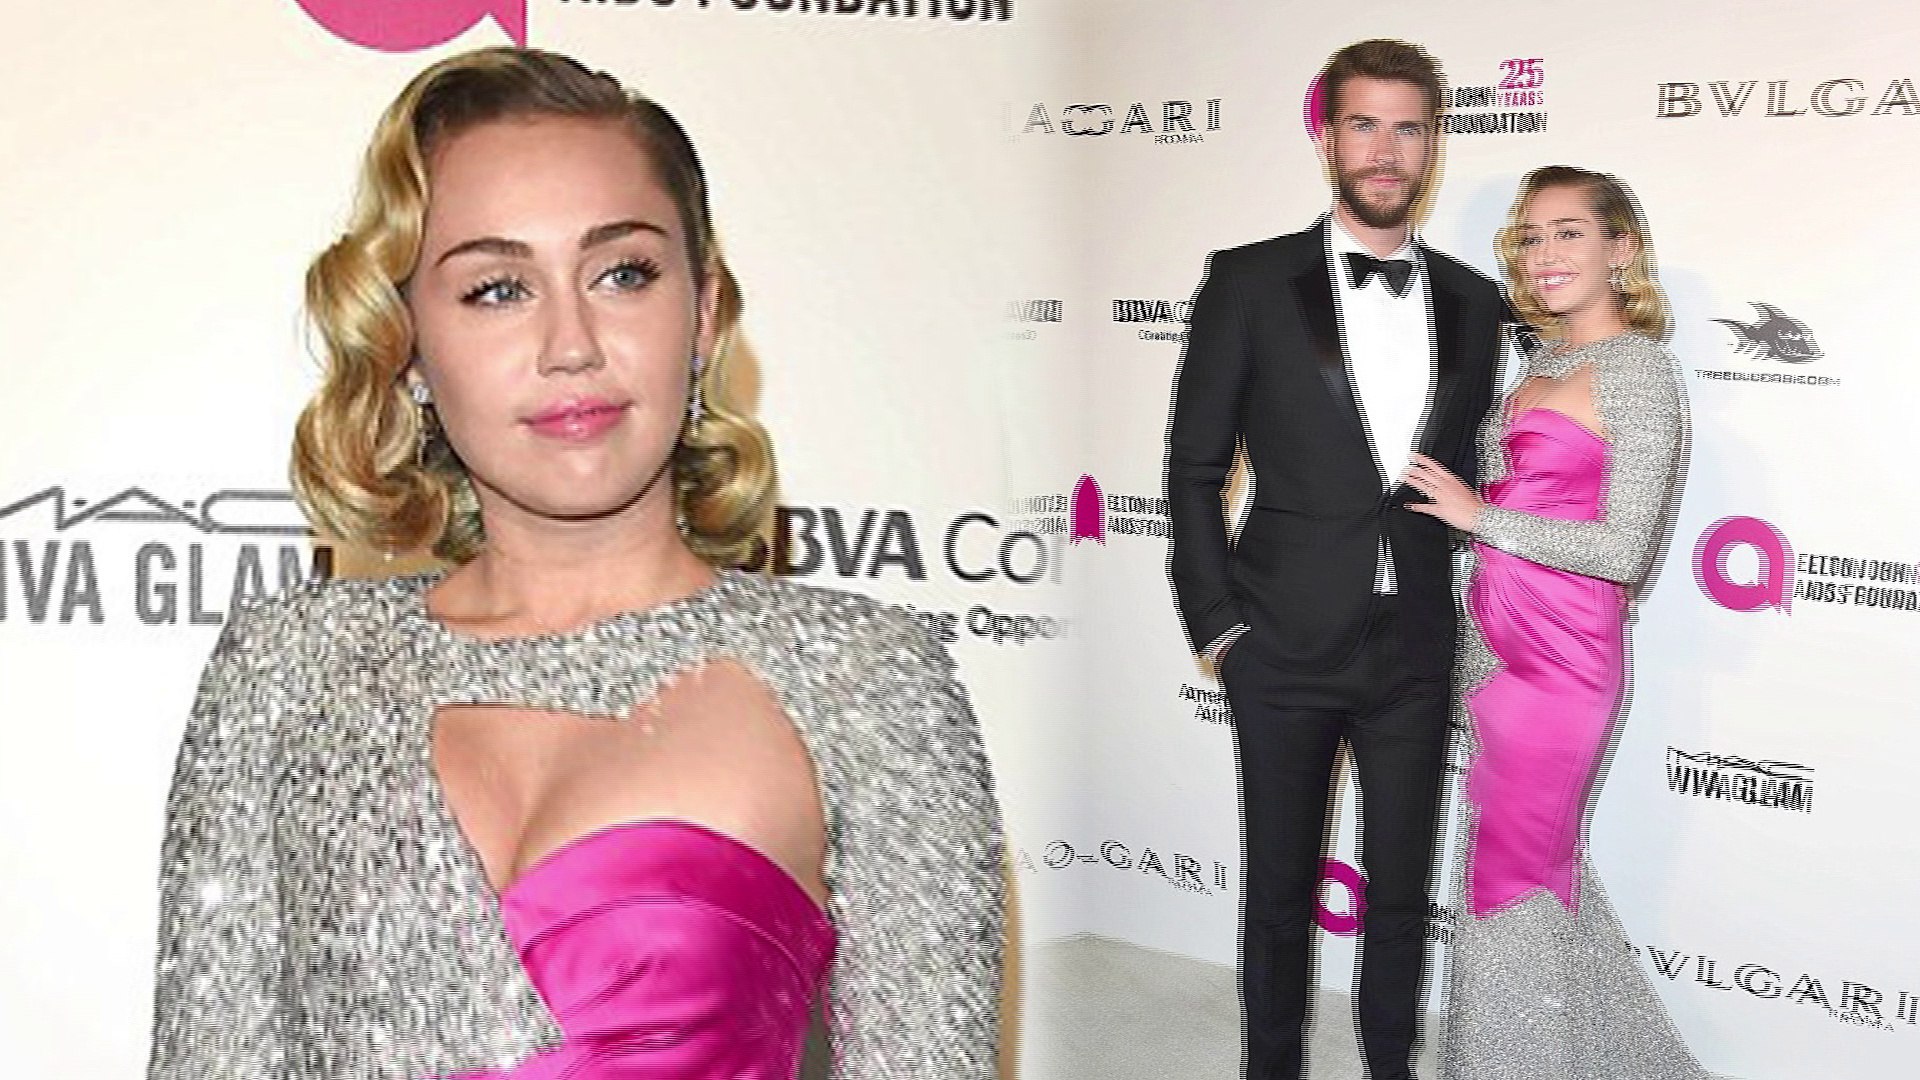 Miley Cyrus oozes old Hollywood glamour in glittery cut-out gown as she joins Liam Hemsworth at Elto